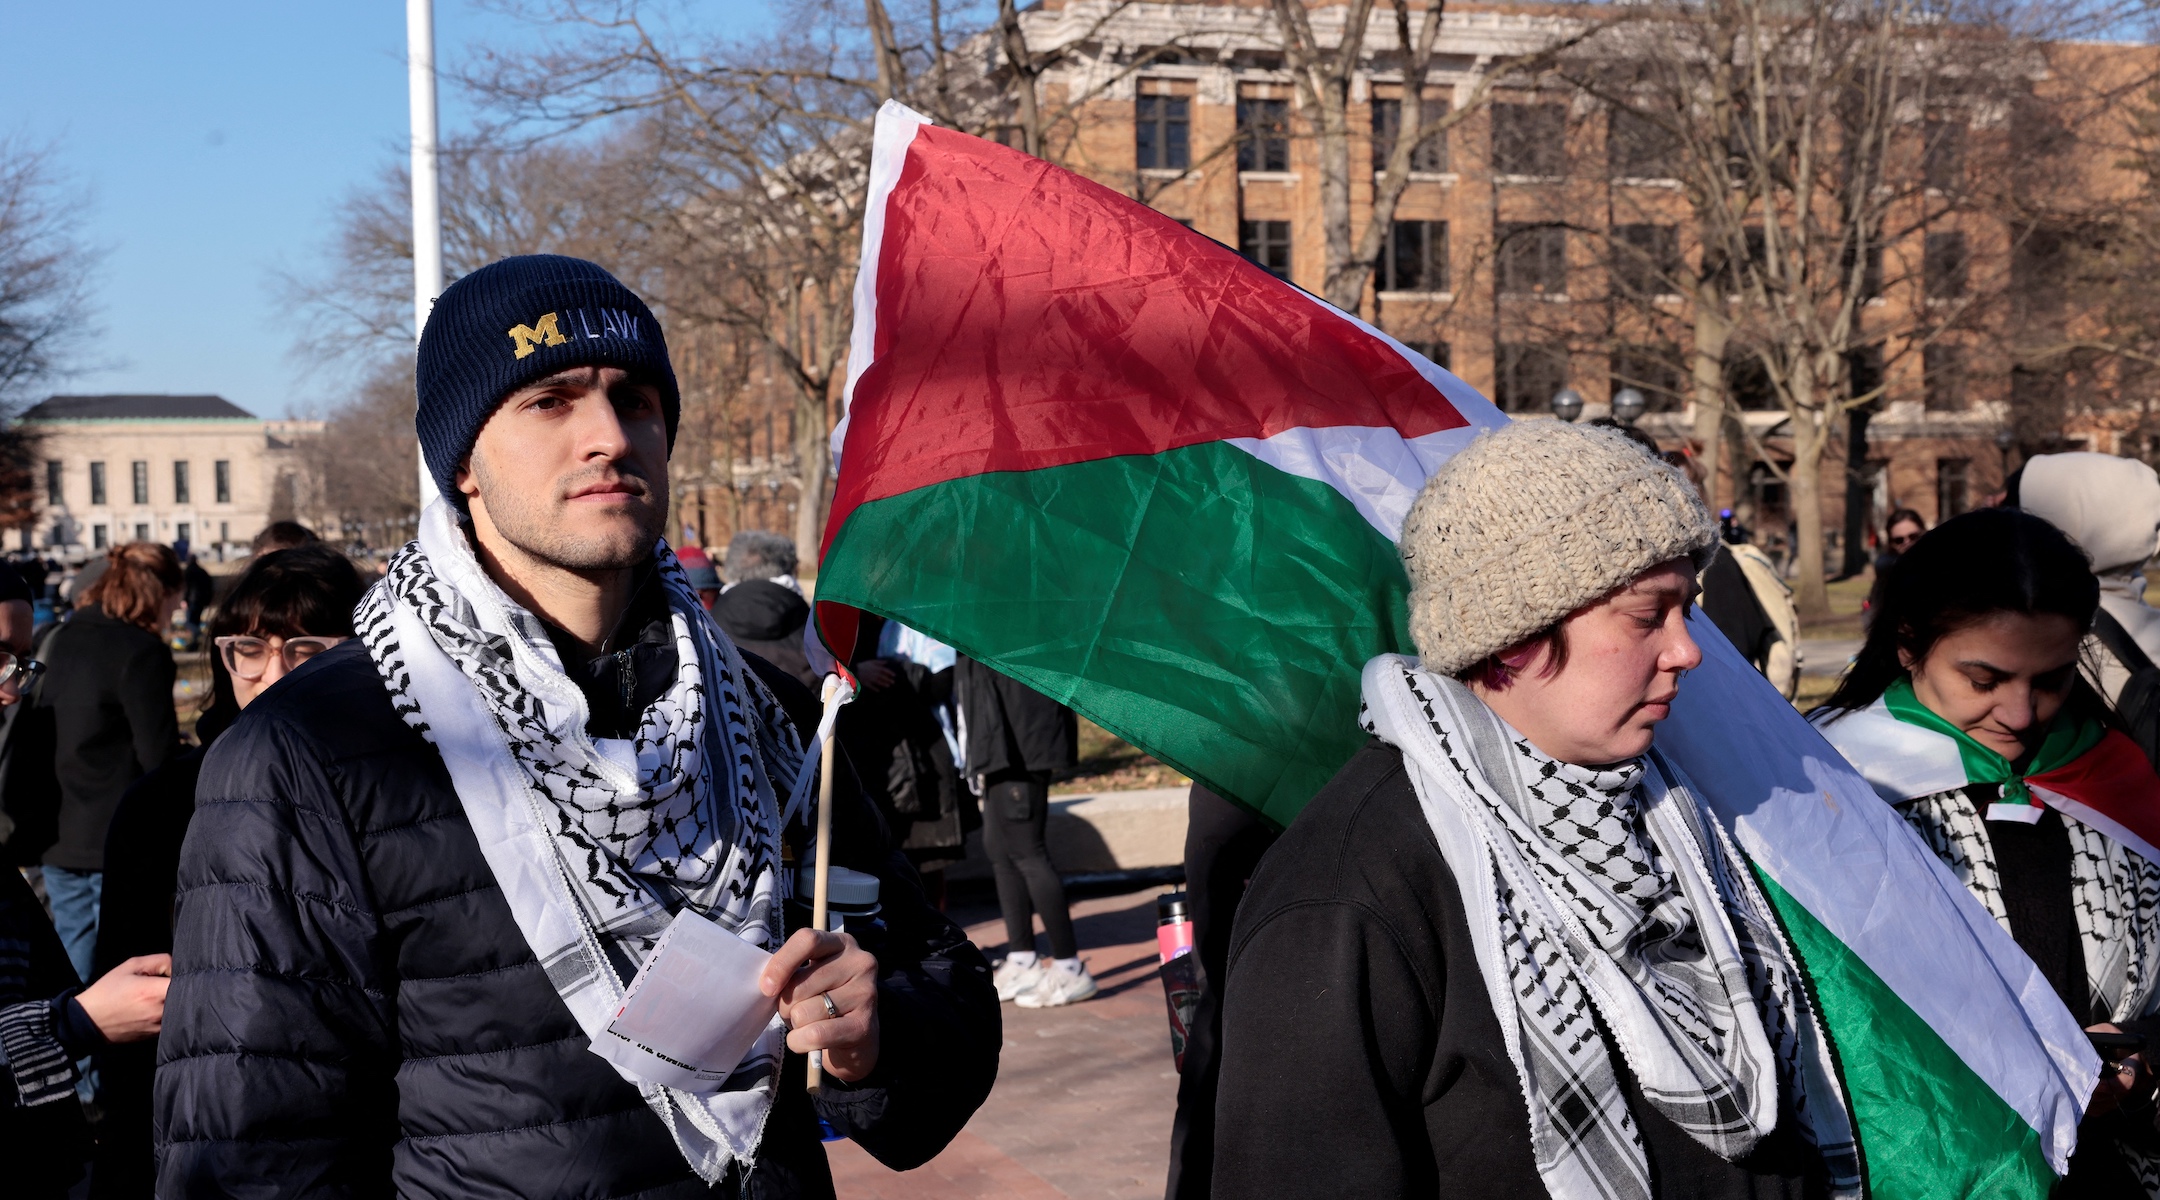 Protesters wearing keffiyehs and carrying Palestinian flags march on a college campus